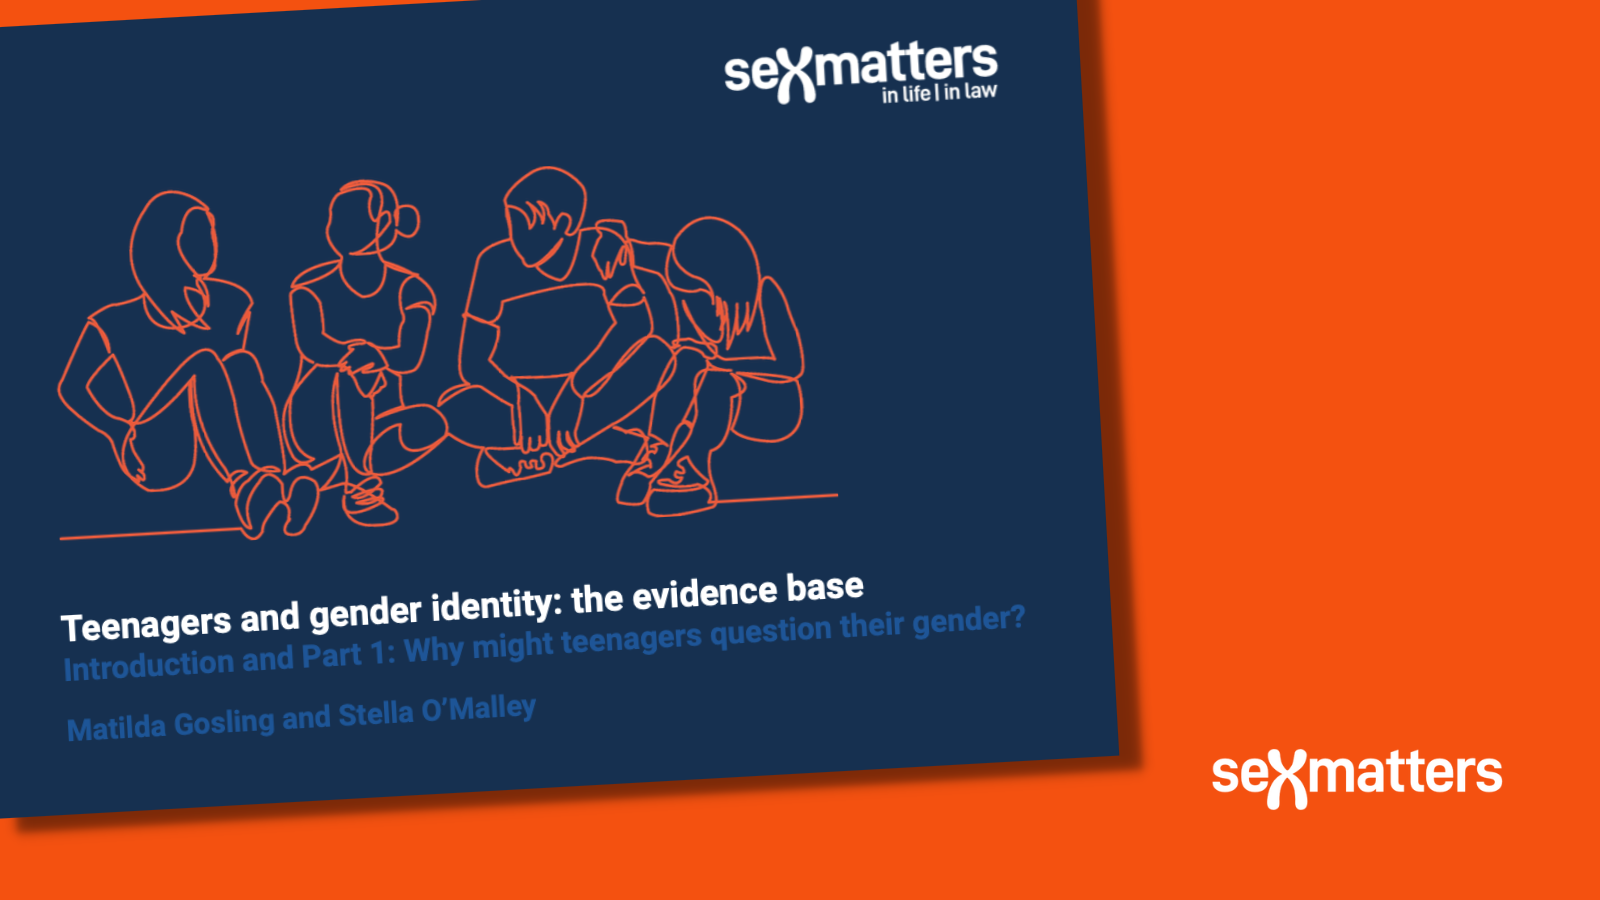 Teenagers and gender identity: the evidence base, part 1